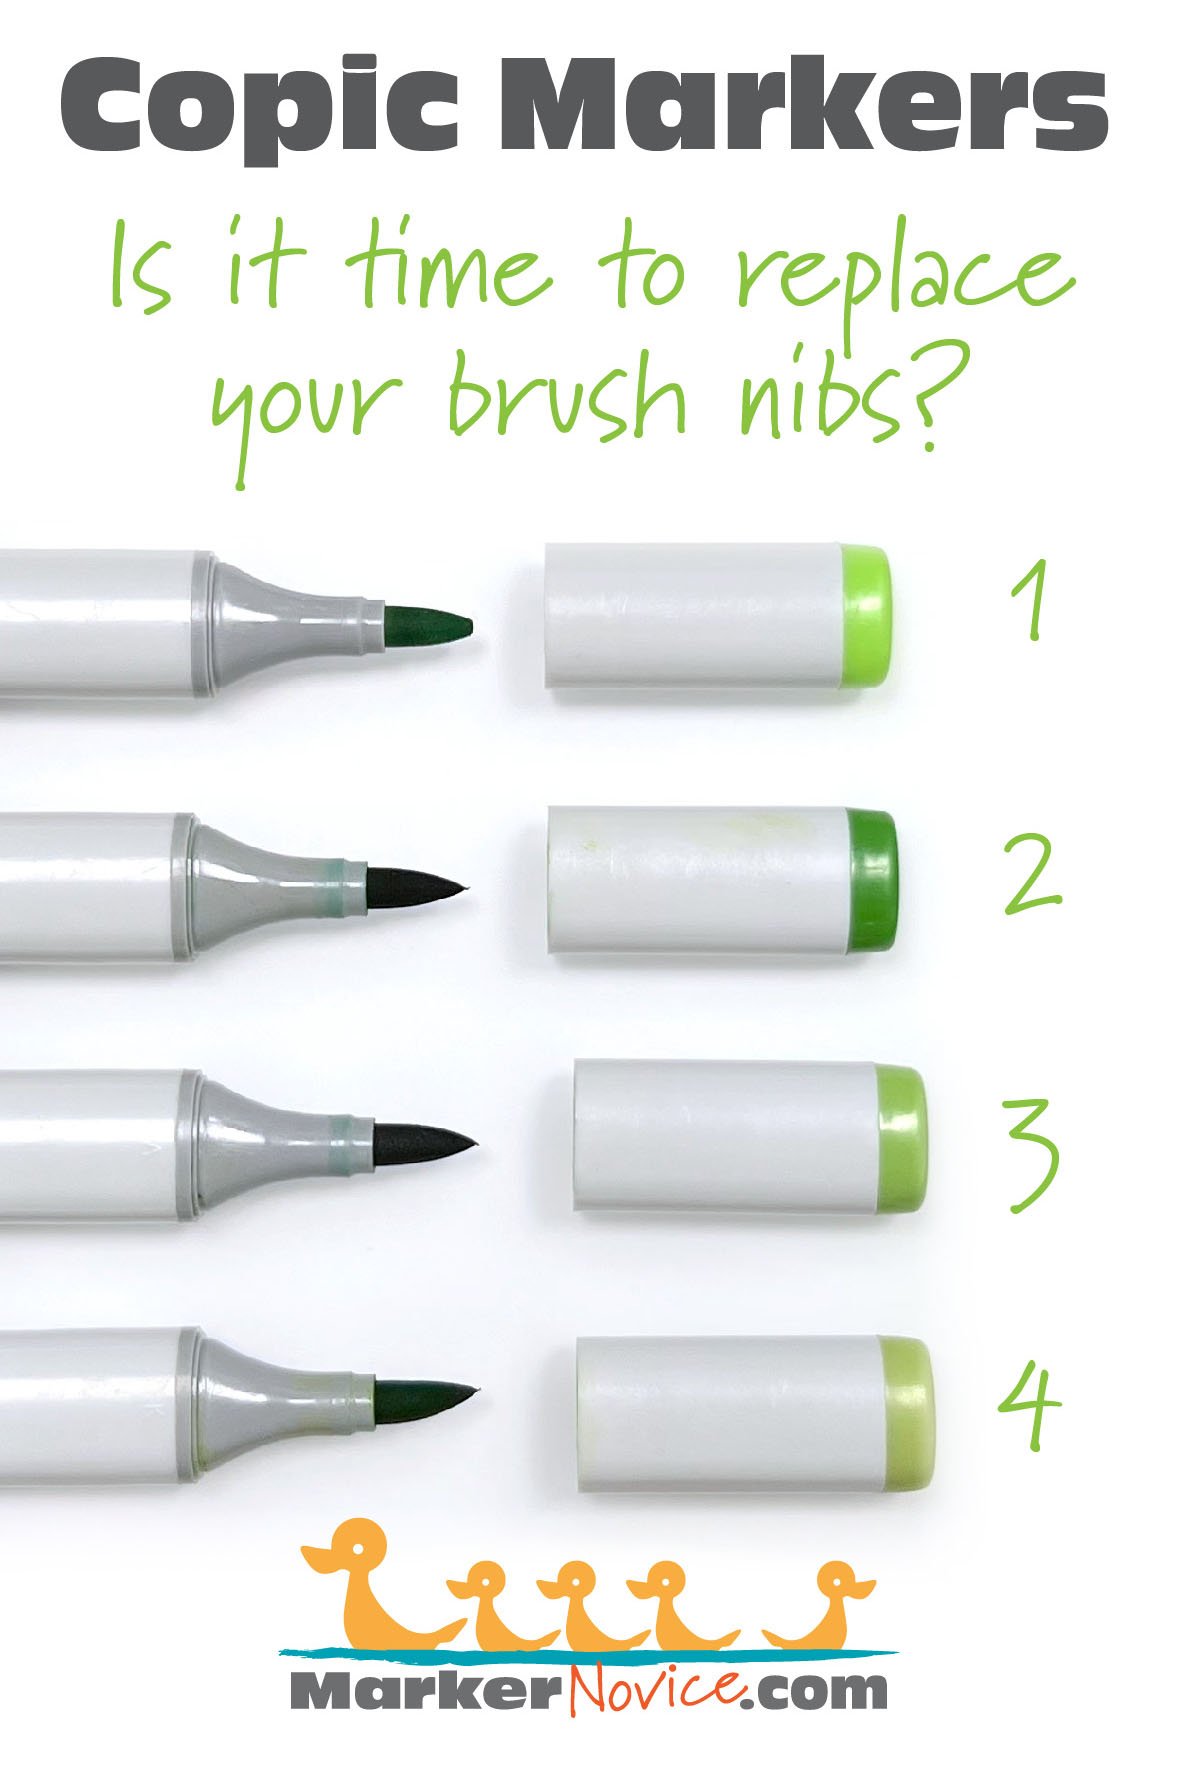 Copic Marker Maintenance: How and When to Replace Worn Brush Nibs